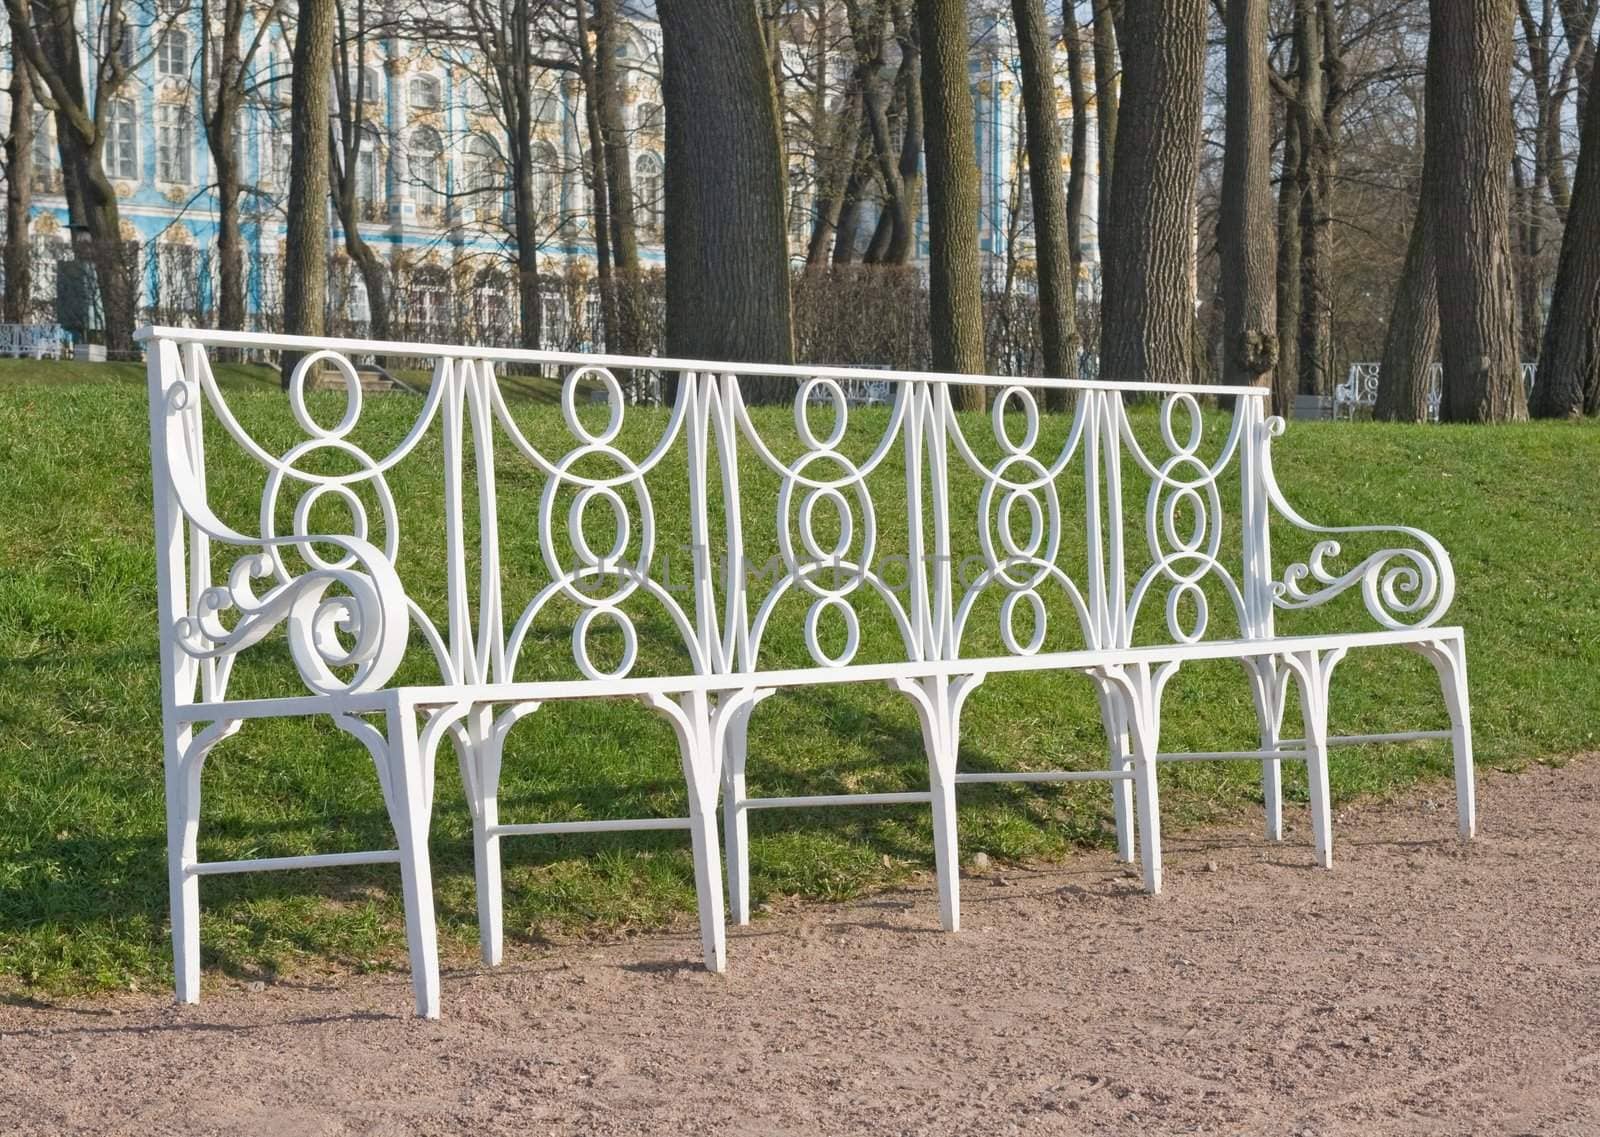 Laced metal bench in a park lane, town of Pushkin, Russia